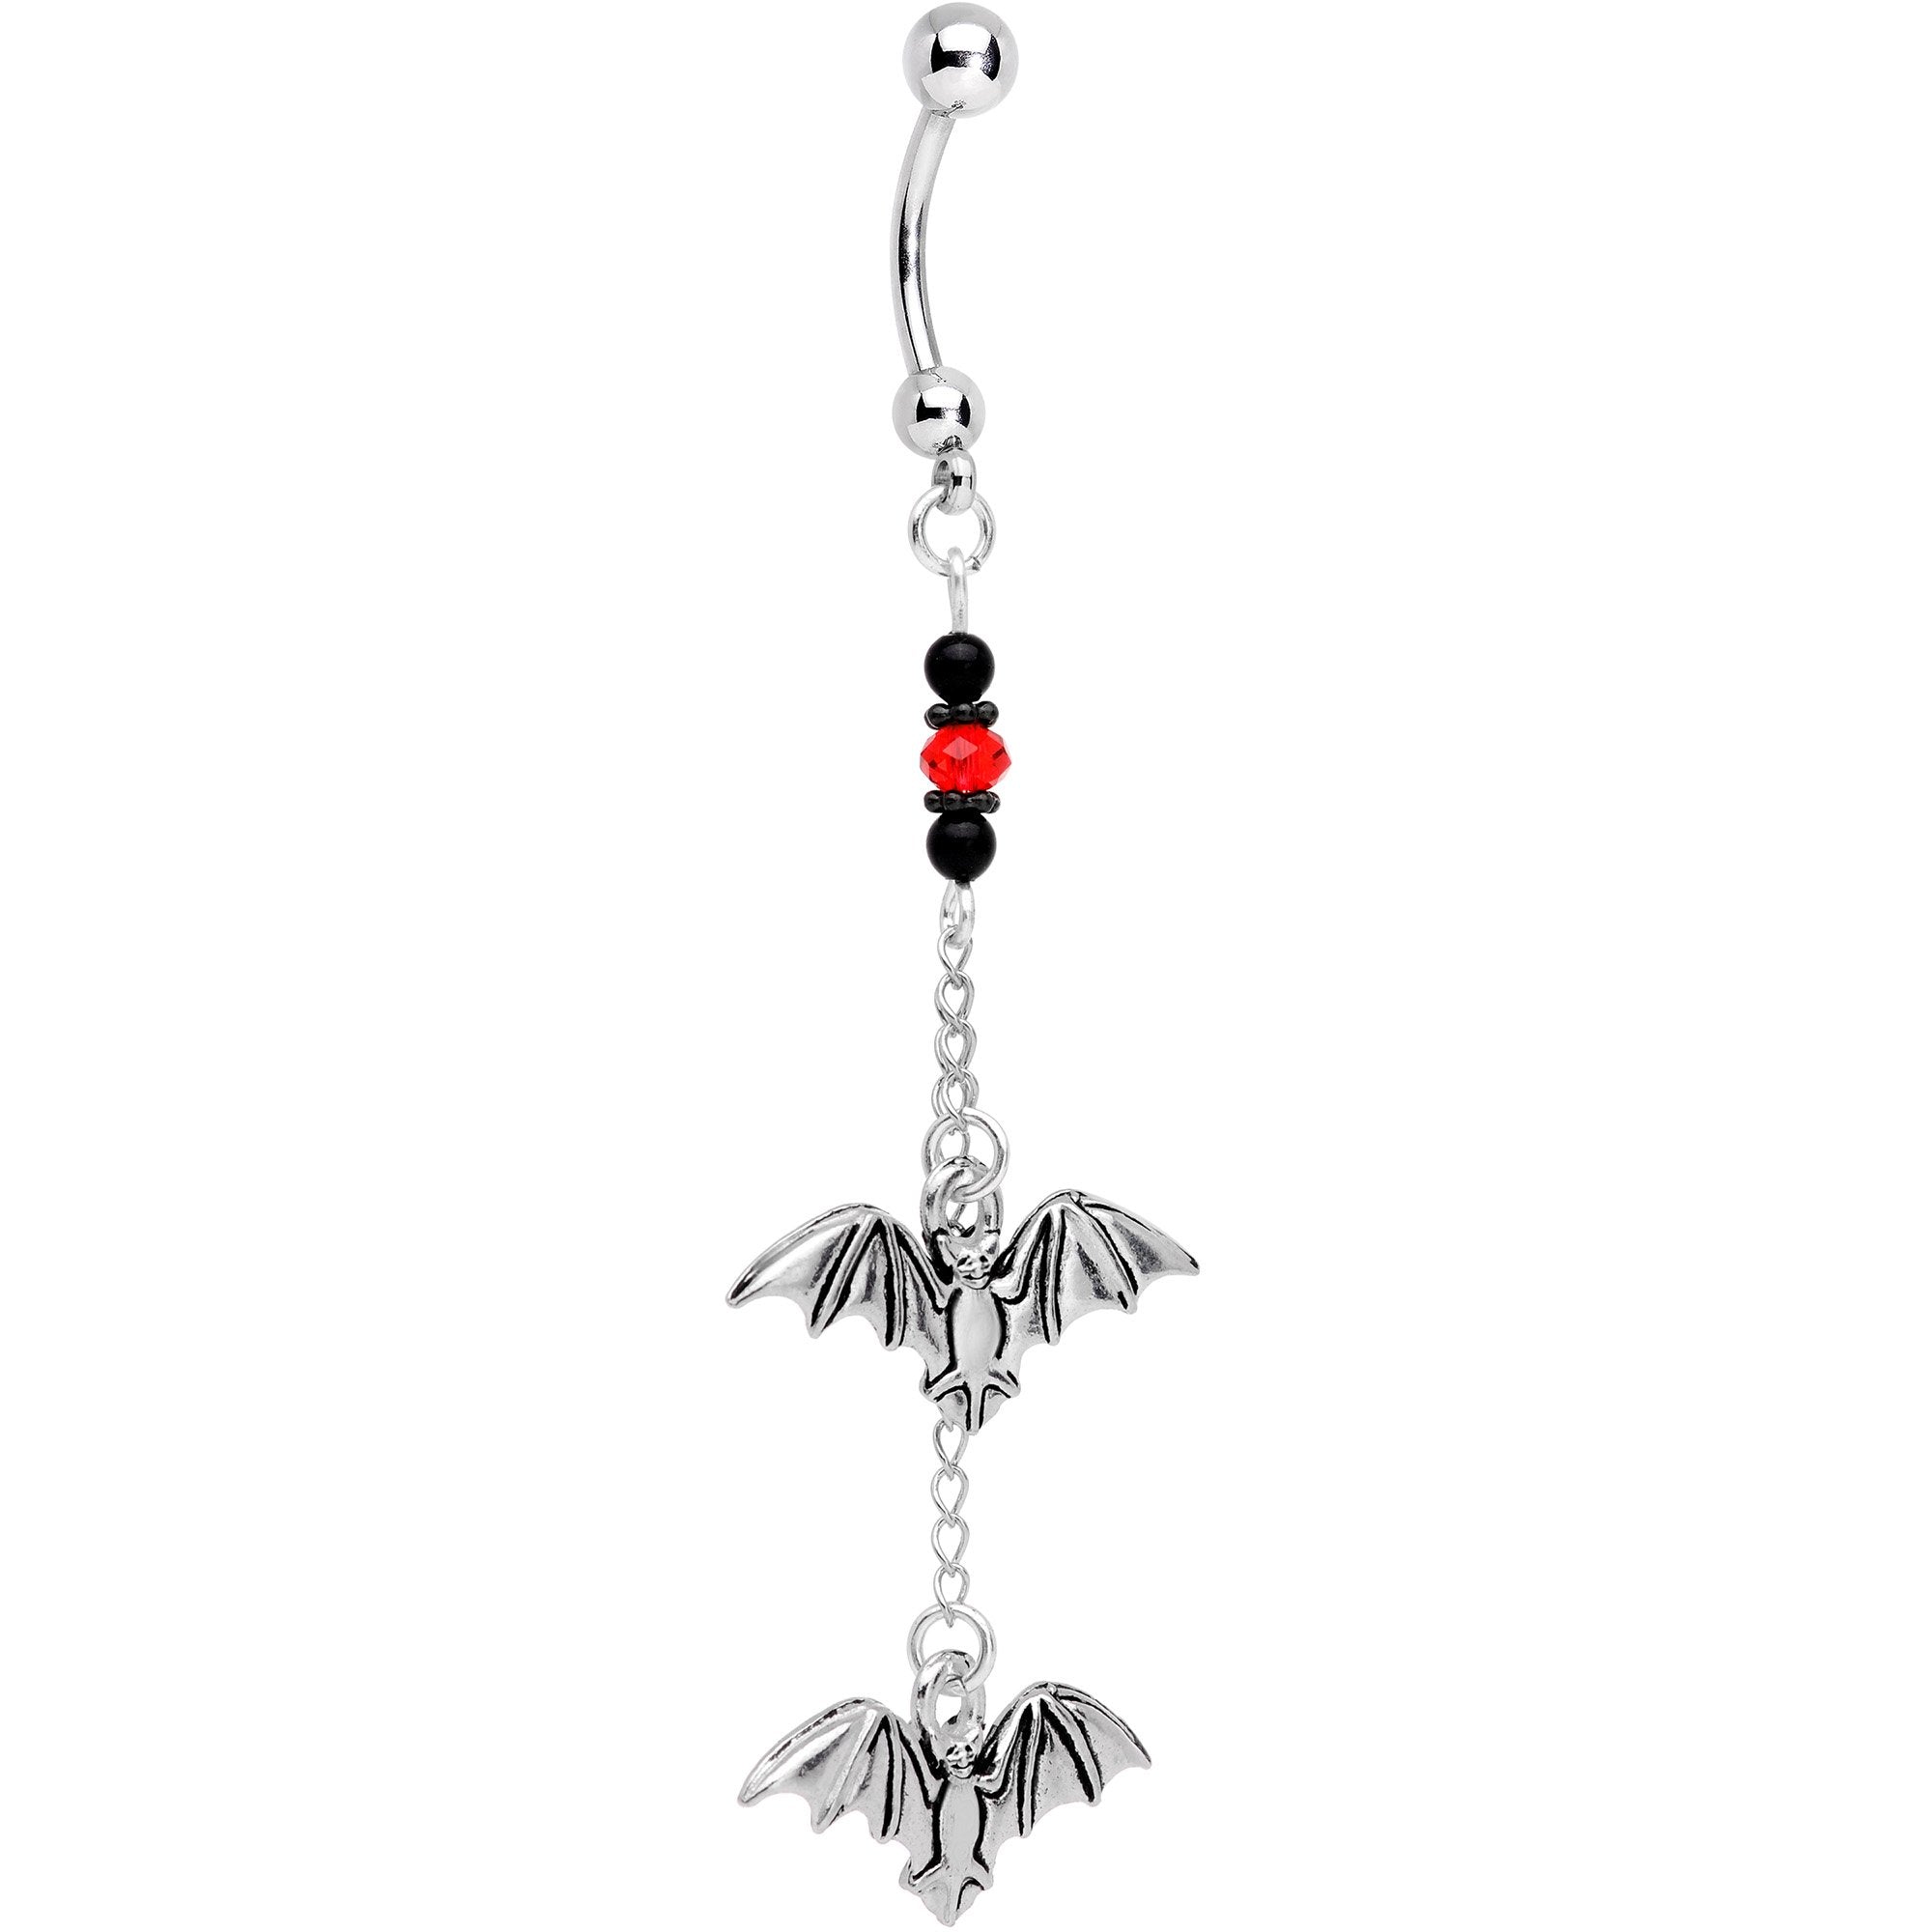 Handcrafted Bats Dangle Belly Ring Created with Crystals